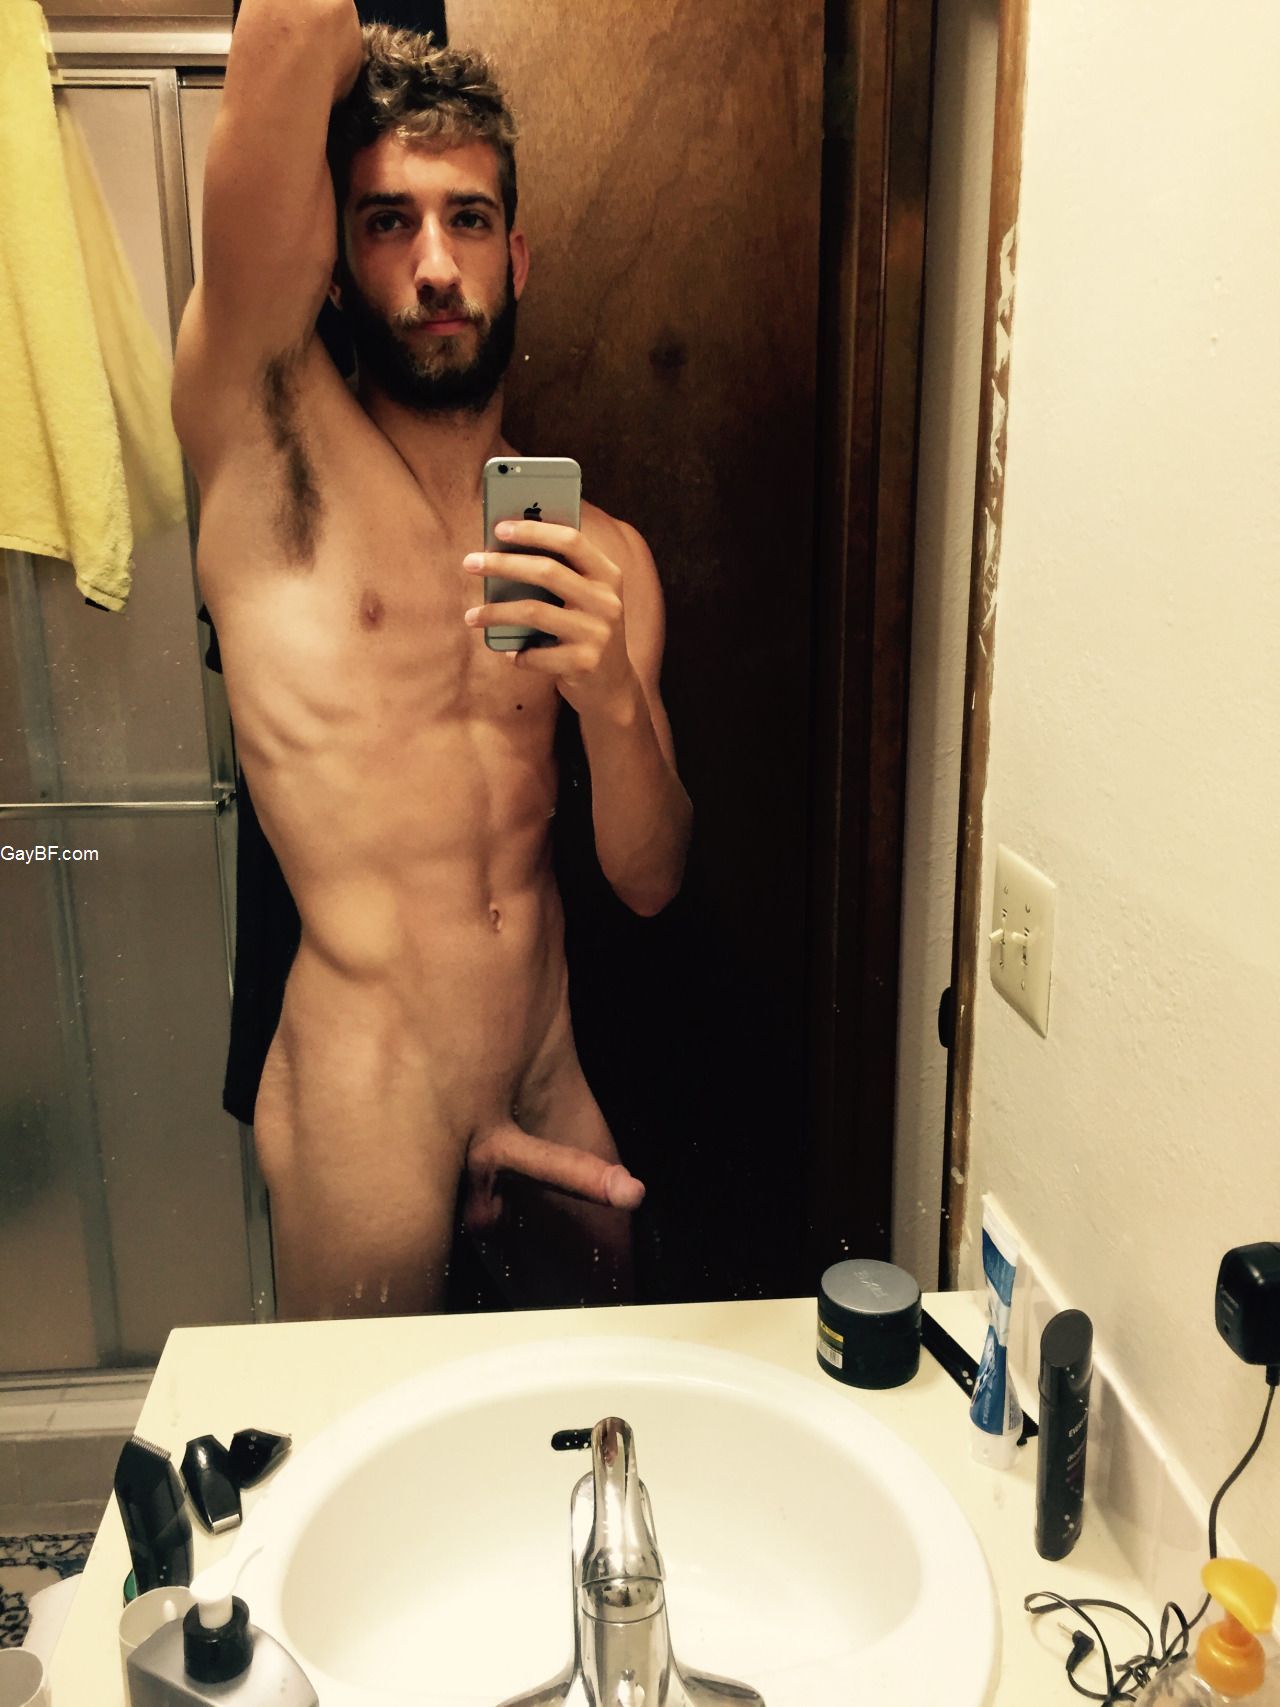 Man Selfies on Twitter: "More sexy guys at https://t.co/PI9kDp9FPE #se...